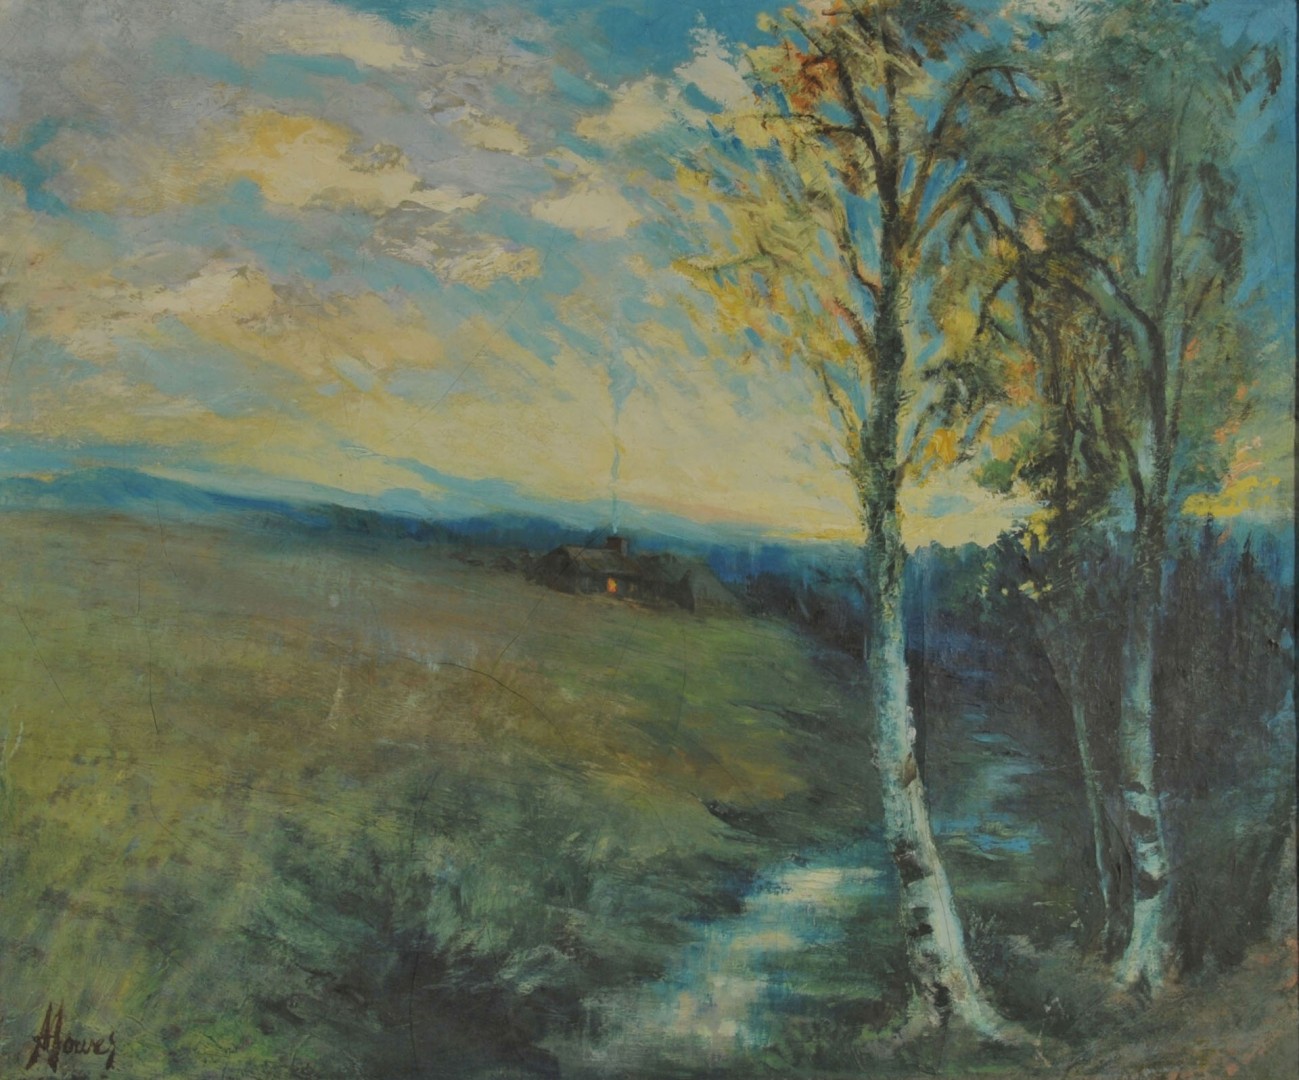 Lot 375: Oil on canvas Landscape of Homestead